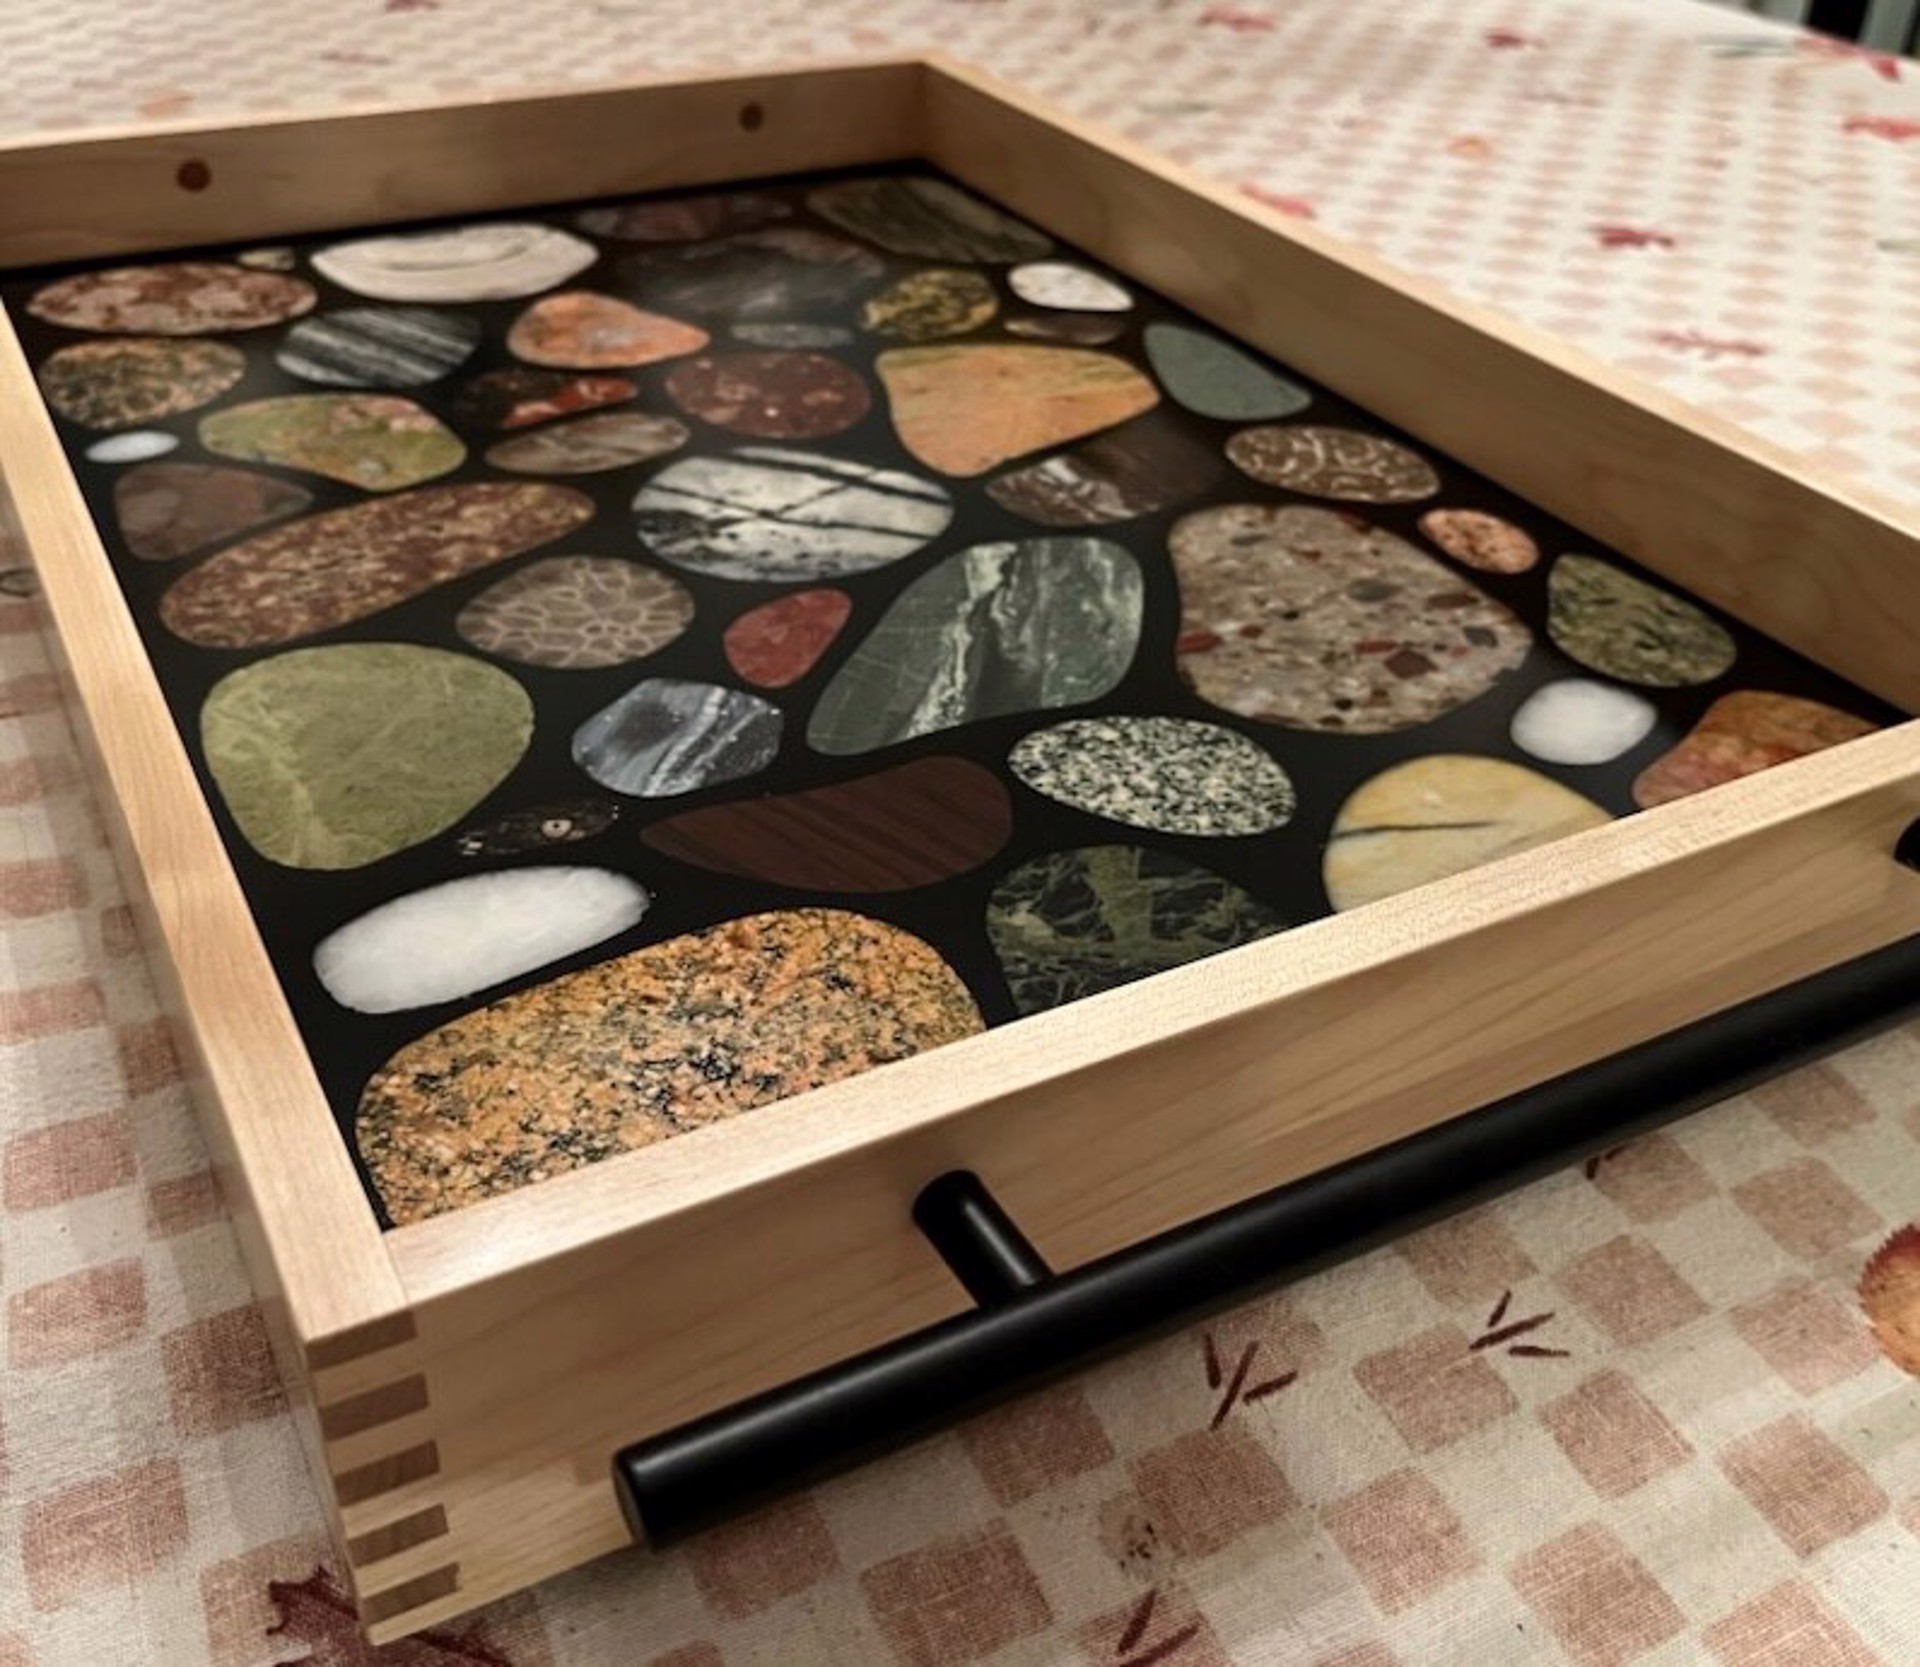 Commission - inlaid stones tray by John Pohlman